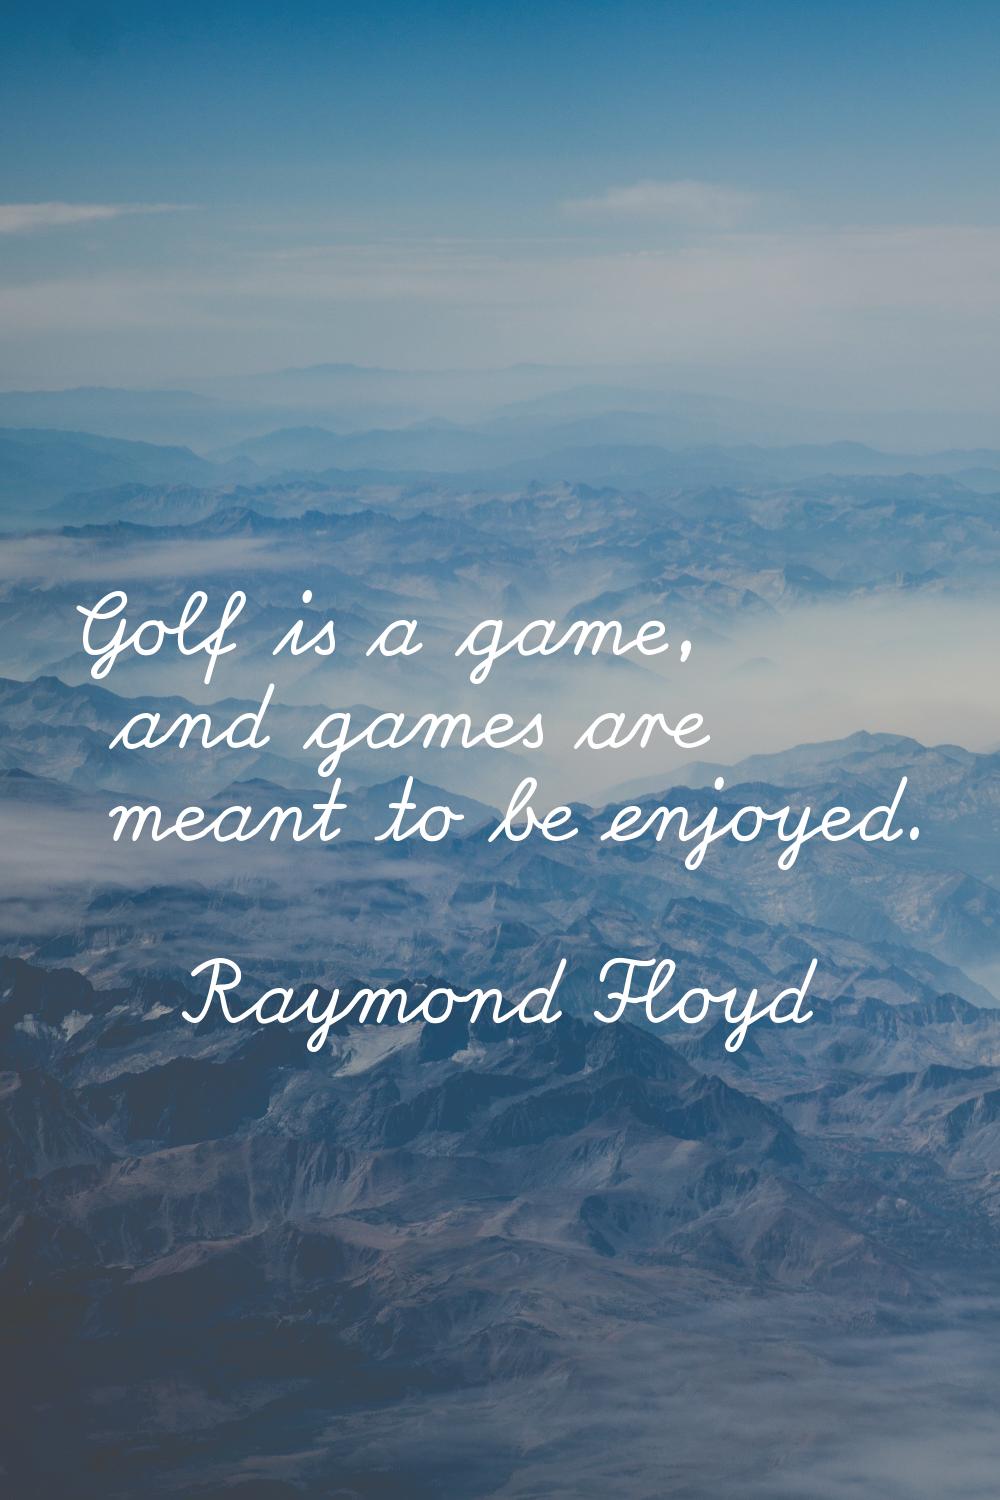 Golf is a game, and games are meant to be enjoyed.